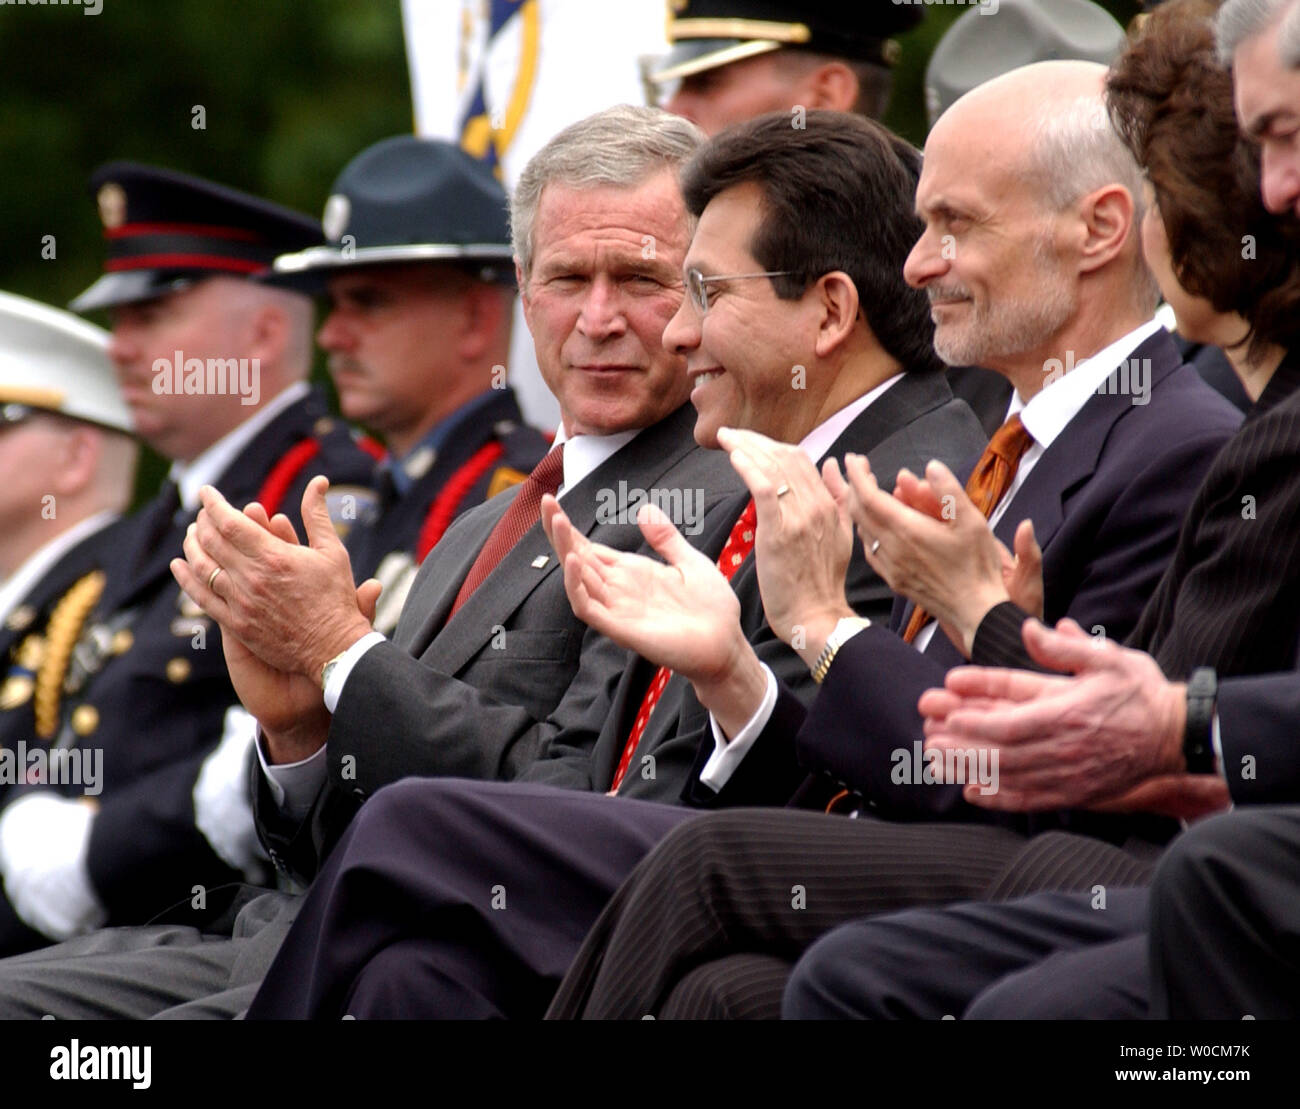 President George W. Bush speaks with Attorney General Alberto Gonzales, right, during the Annual Peace Officers' Memorial Service on May 15, 2005 at the Capitol building in Washington. Secretary of Homeland Security Michael Chertoff sits to their right.     (UPI Photo/Michael Kleinfeld) Stock Photo